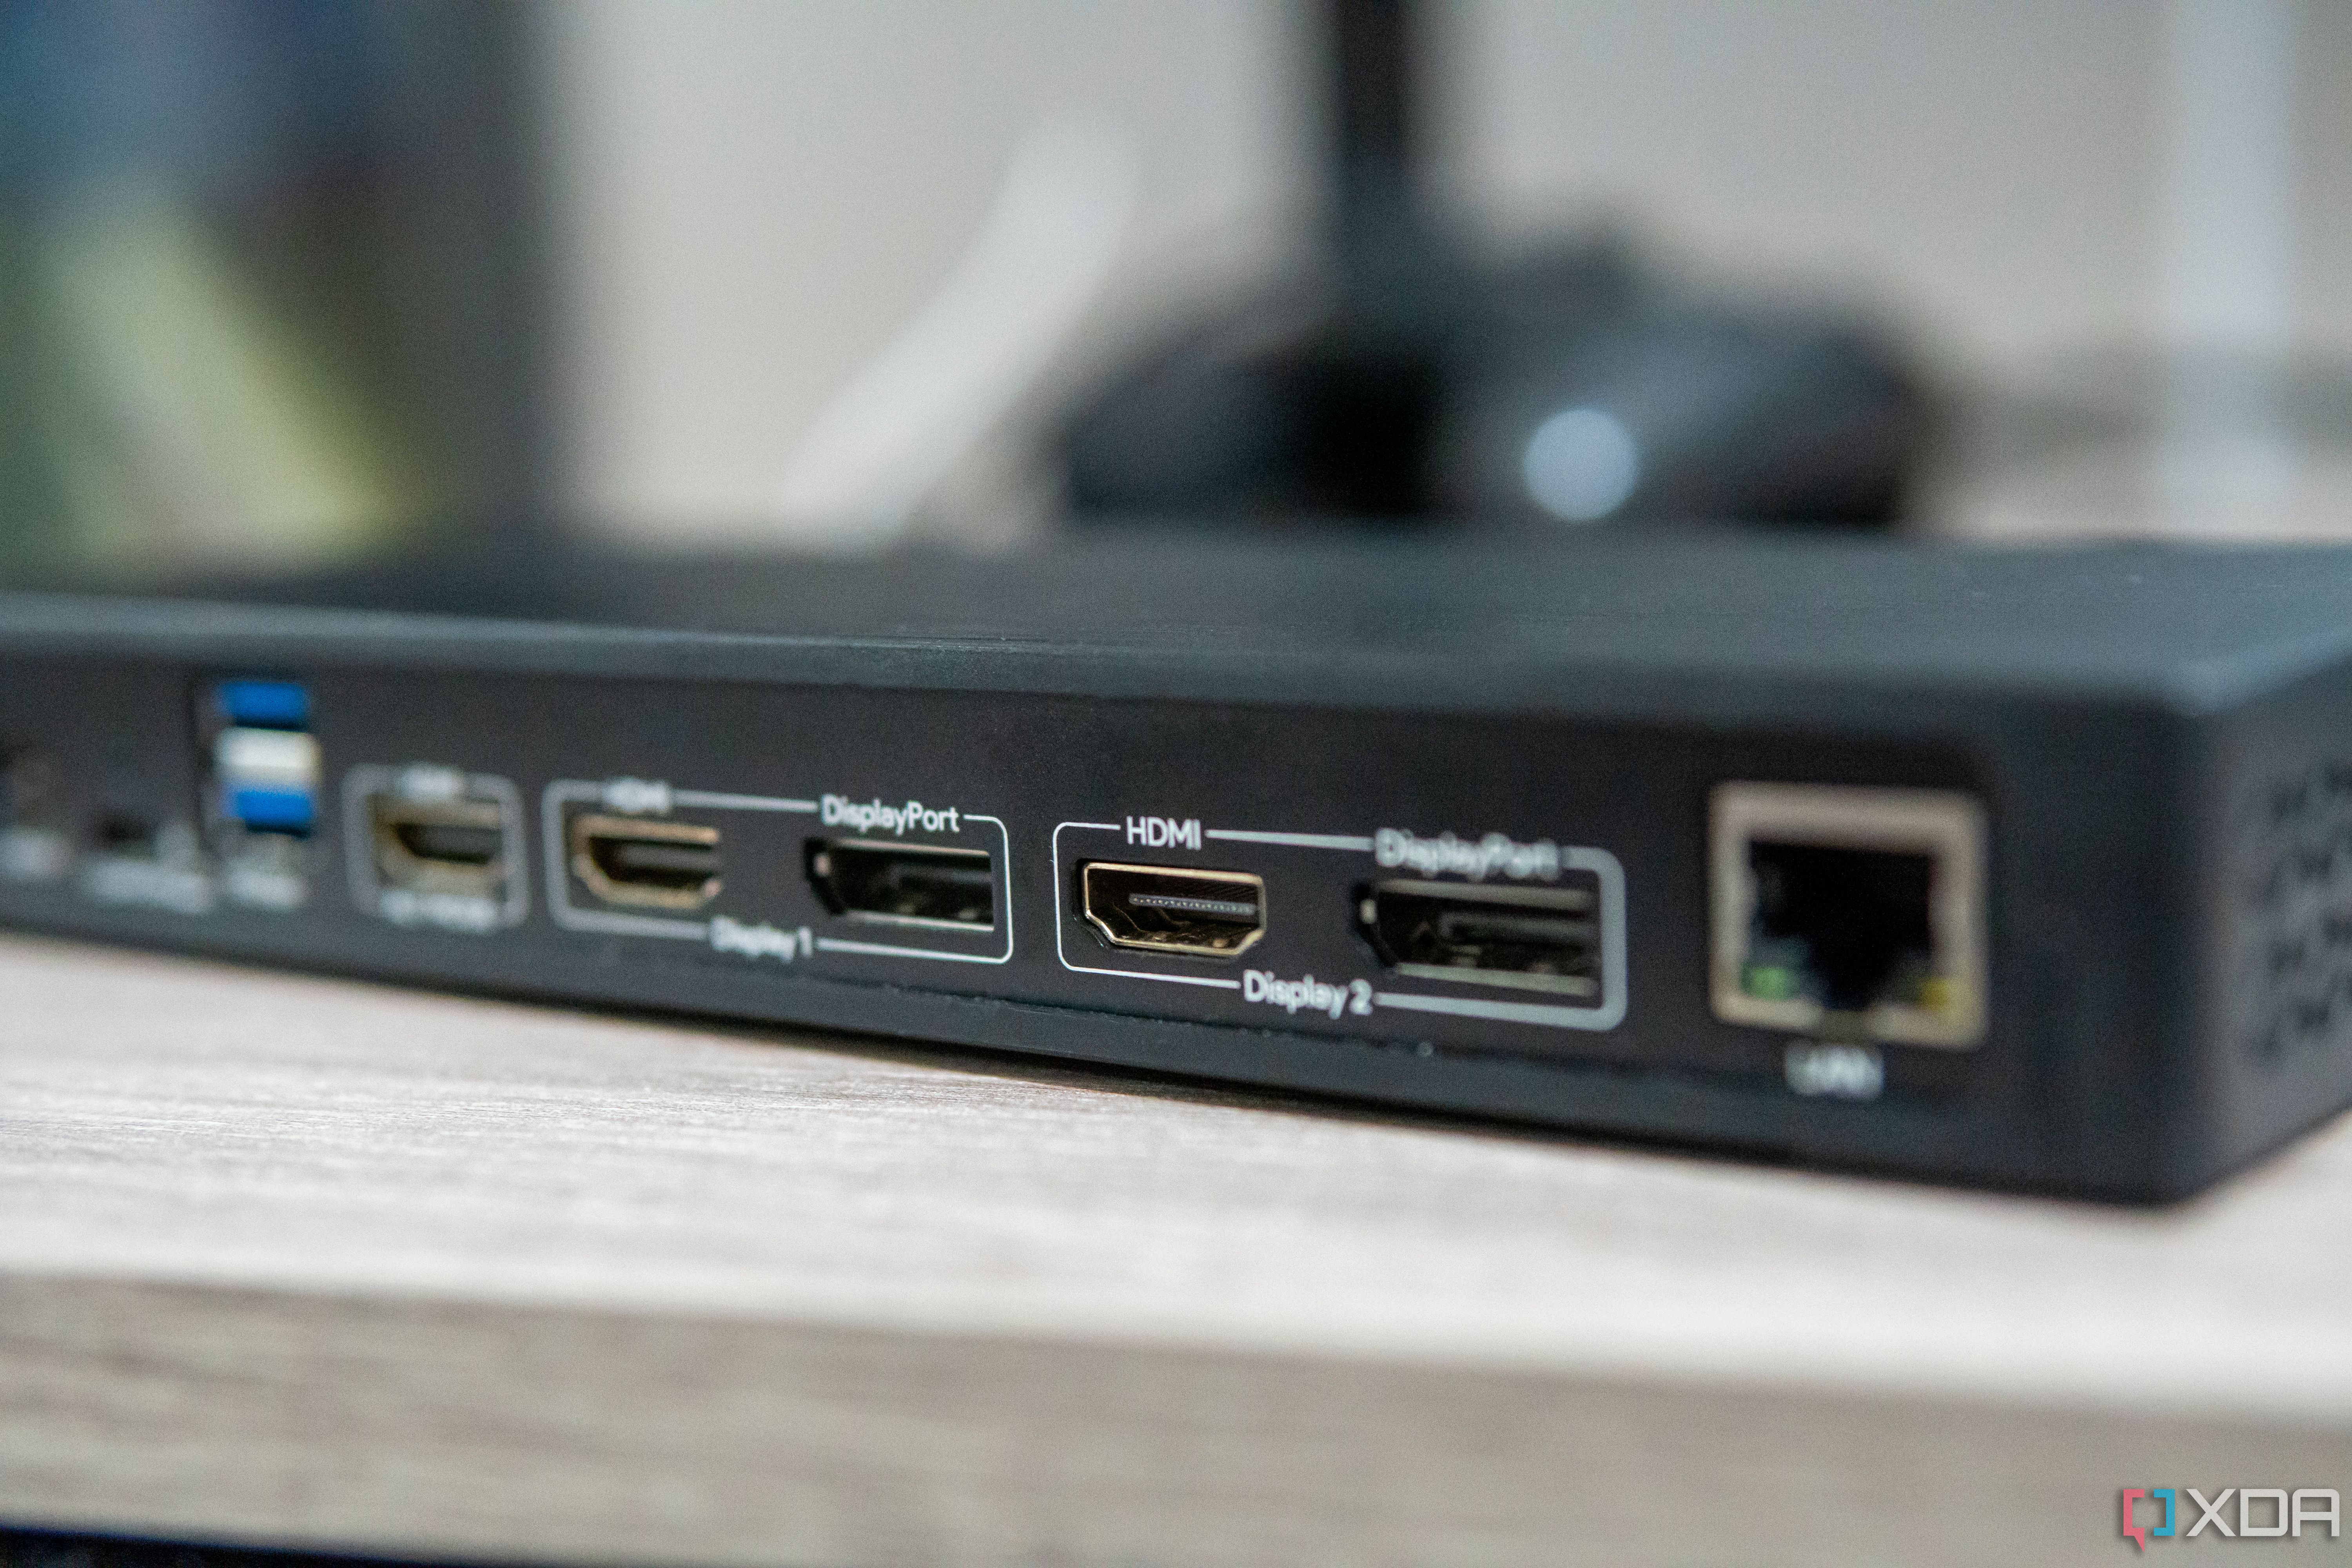 The VisionTek VT7400's angled rear view focuses on the DisplayPort and HDMI ports